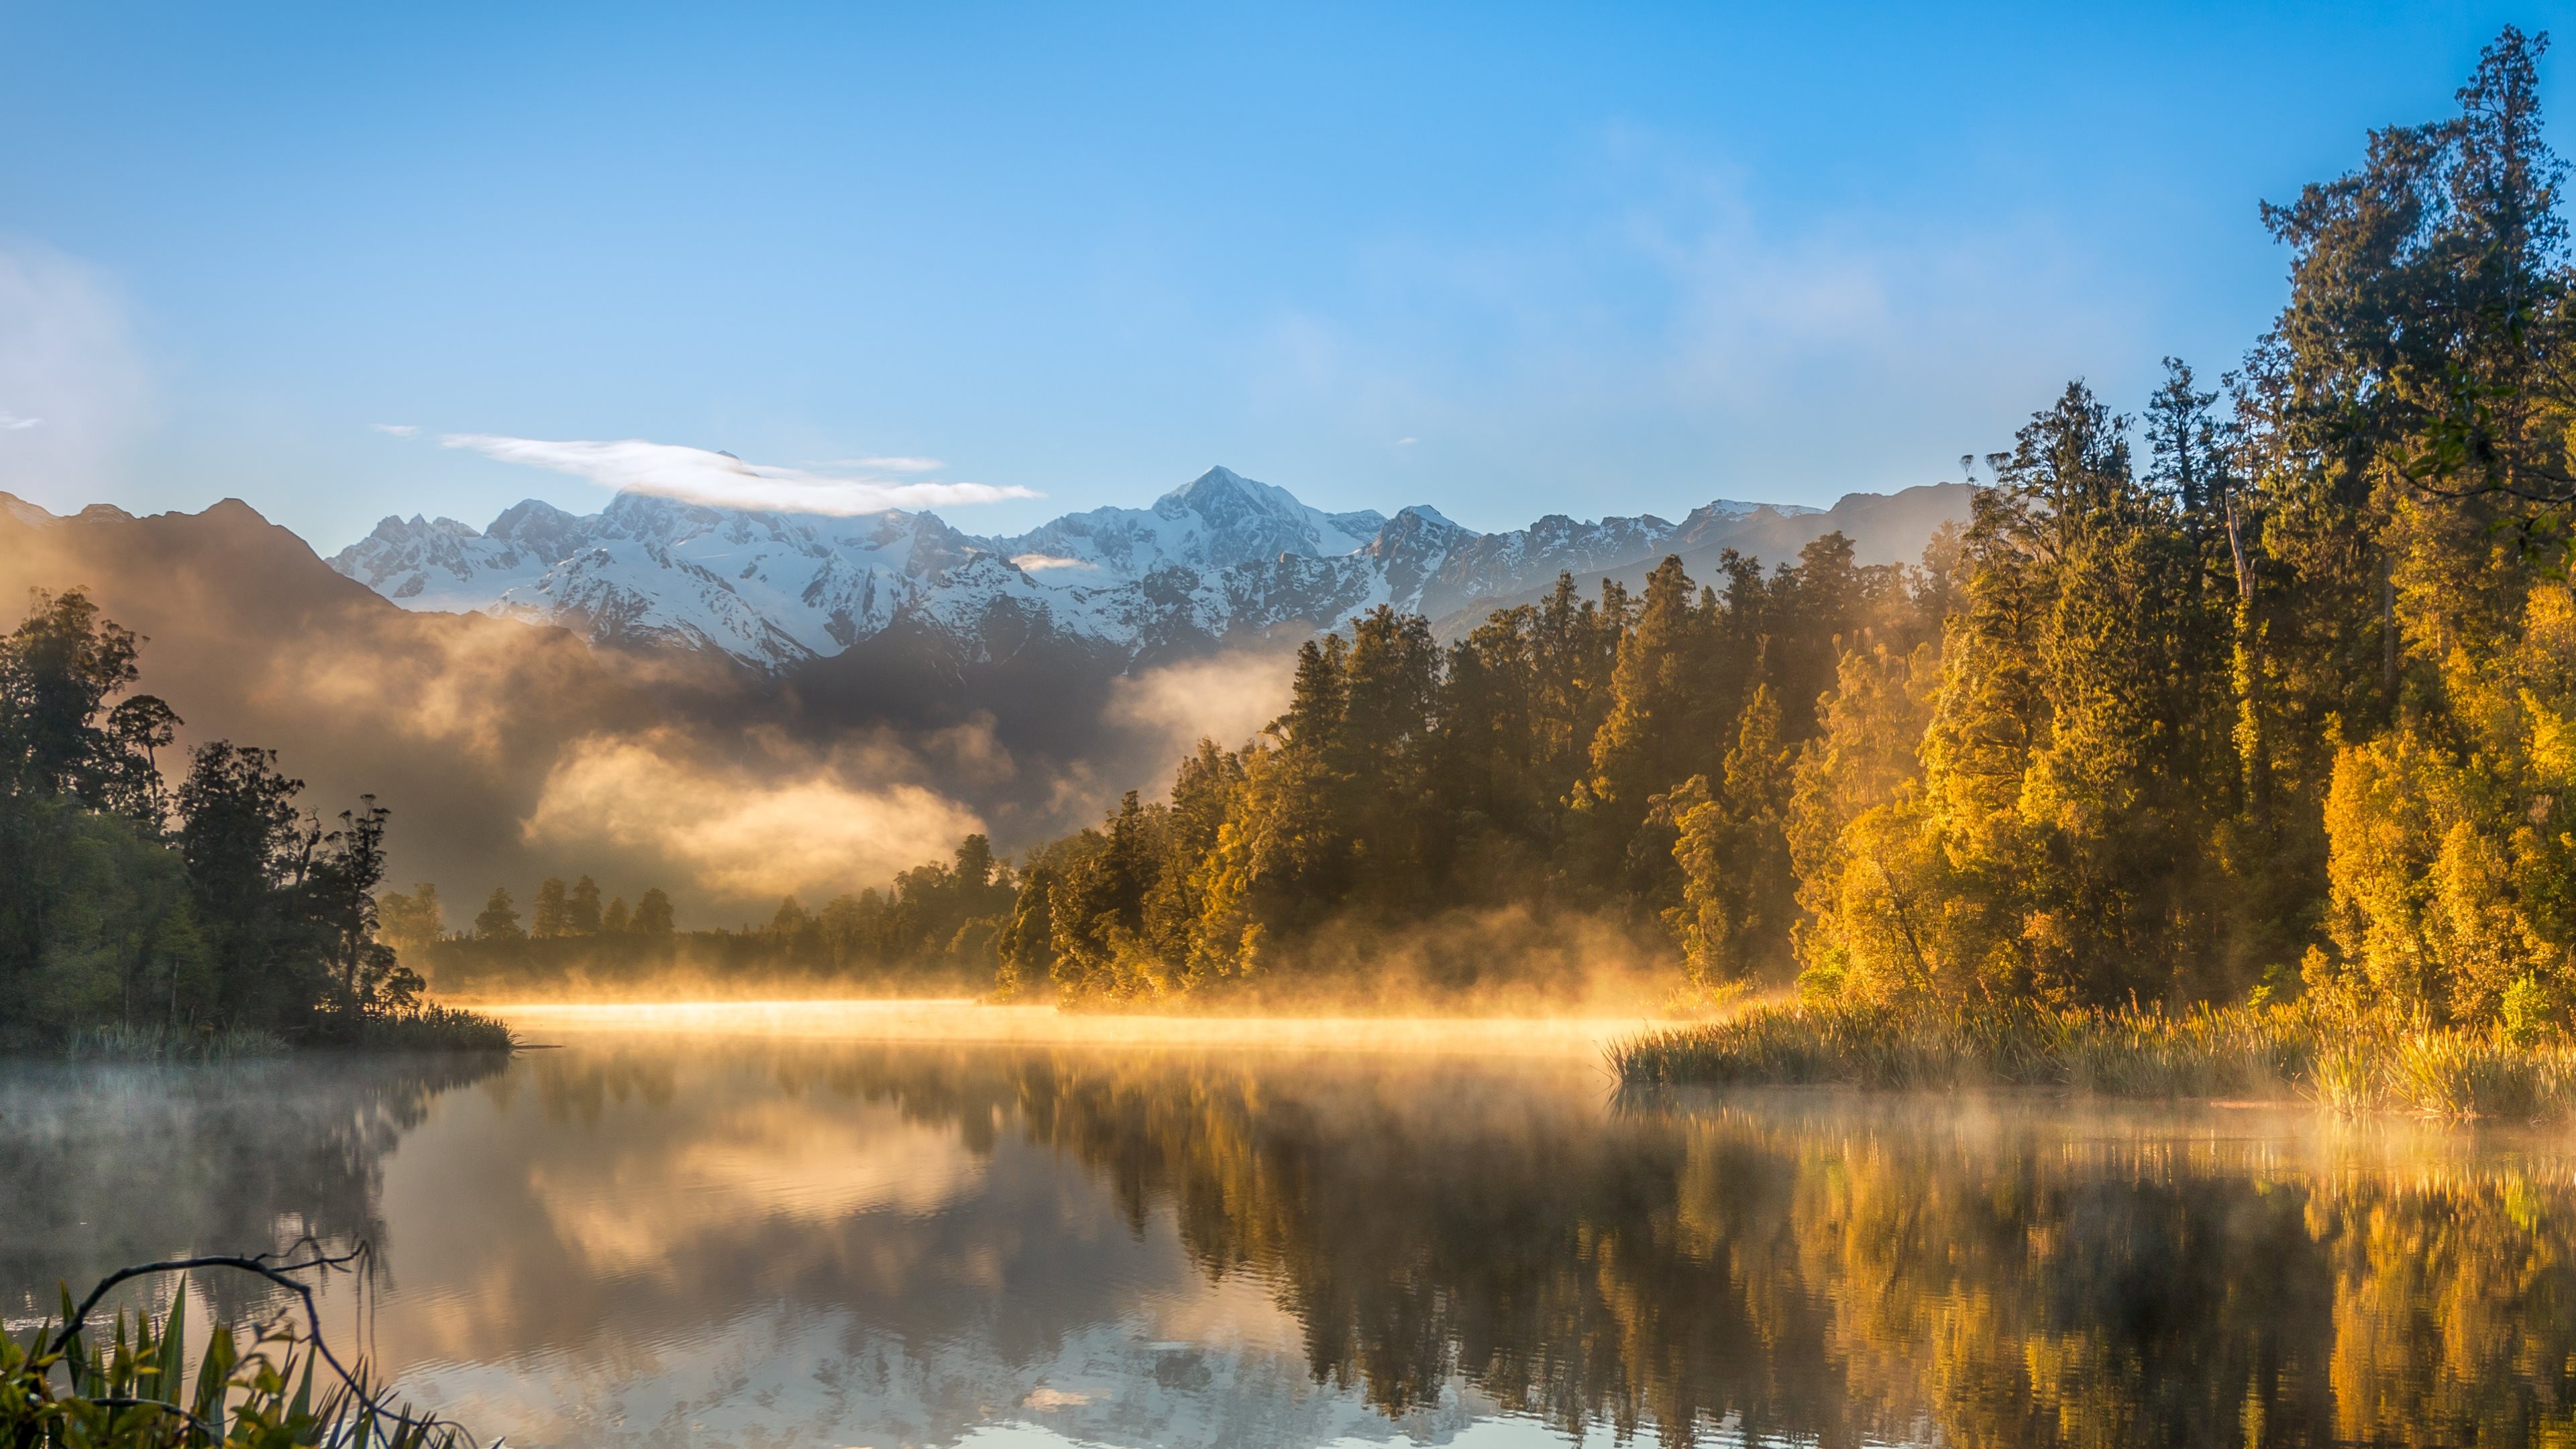 General 3840x2160 landscape lake New Zealand nature mountains snowy peak snowy mountain calm waters sunlight